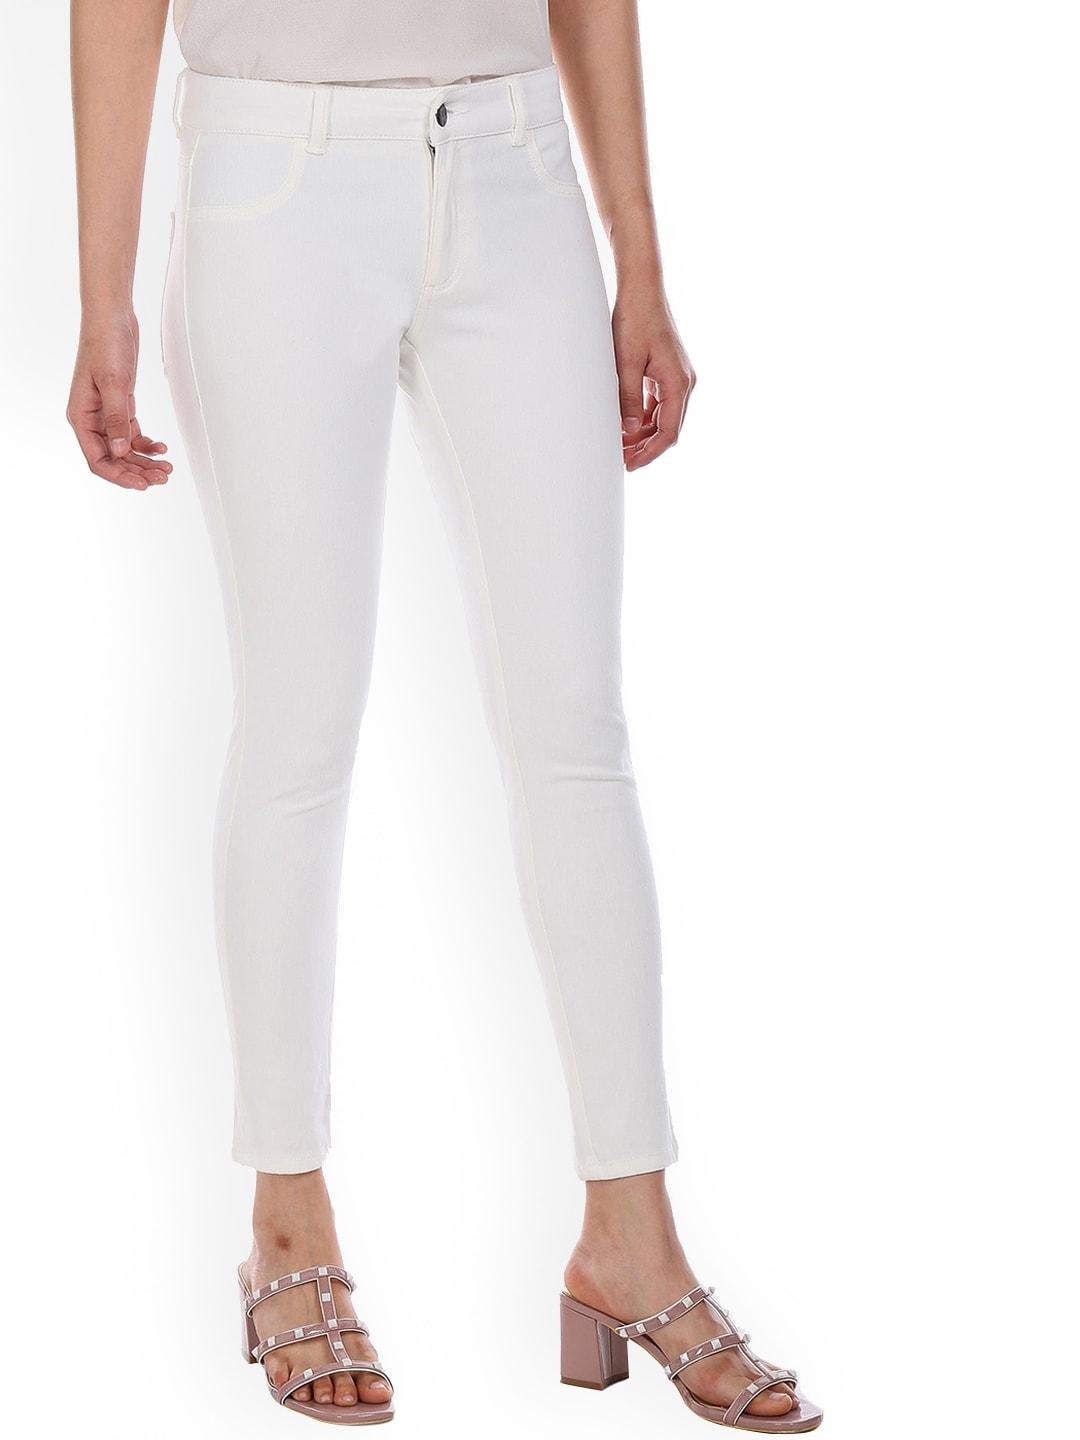 sugr-women-white-solid-mid-rise-jeggings